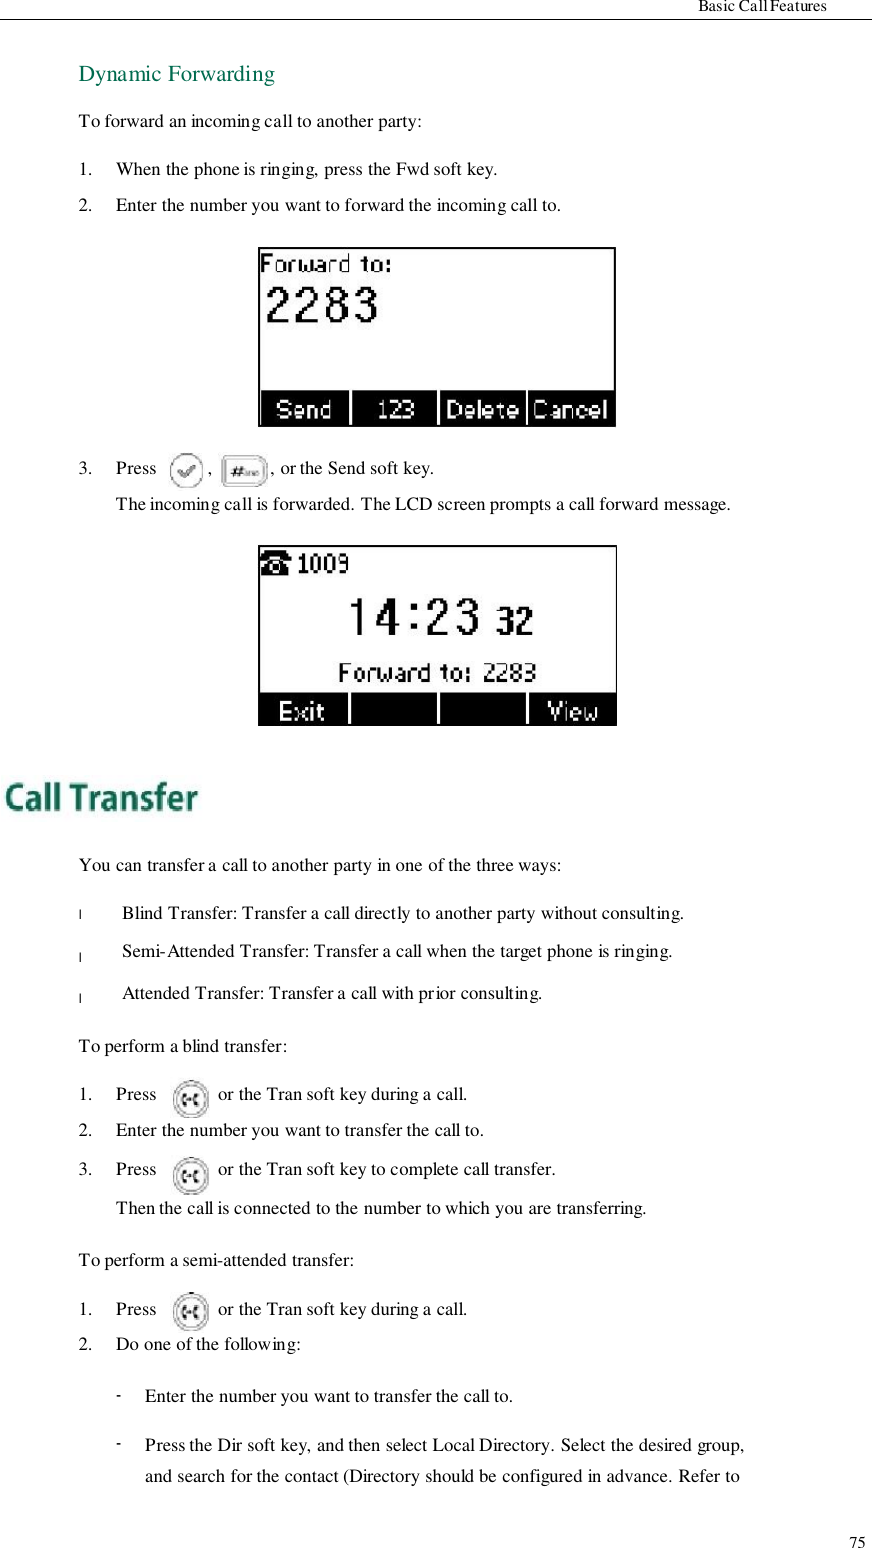                     Basic Call Features  Dynamic Forwarding  To forward an incoming call to another party:  1. 2.  When the phone is ringing, press the Fwd soft key. Enter the number you want to forward the incoming call to.            3.            Press            ,            , or the Send soft key. The incoming call is forwarded. The LCD screen prompts a call forward message.                 You can transfer a call to another party in one of the three ways:  l  l  l  Blind Transfer: Transfer a call directly to another party without consulting. Semi-Attended Transfer: Transfer a call when the target phone is ringing. Attended Transfer: Transfer a call with prior consulting.  To perform a blind transfer:  1.   Press   or the Tran soft key during a call. 2.  Enter the number you want to transfer the call to. 3.  Press  or the Tran soft key to complete call transfer. Then the call is connected to the number to which you are transferring.  To perform a semi-attended transfer:  1.  Press  or the Tran soft key during a call. 2.  Do one of the following:  -  -  Enter the number you want to transfer the call to.  Press the Dir soft key, and then select Local Directory. Select the desired group, and search for the contact (Directory should be configured in advance. Refer to   75